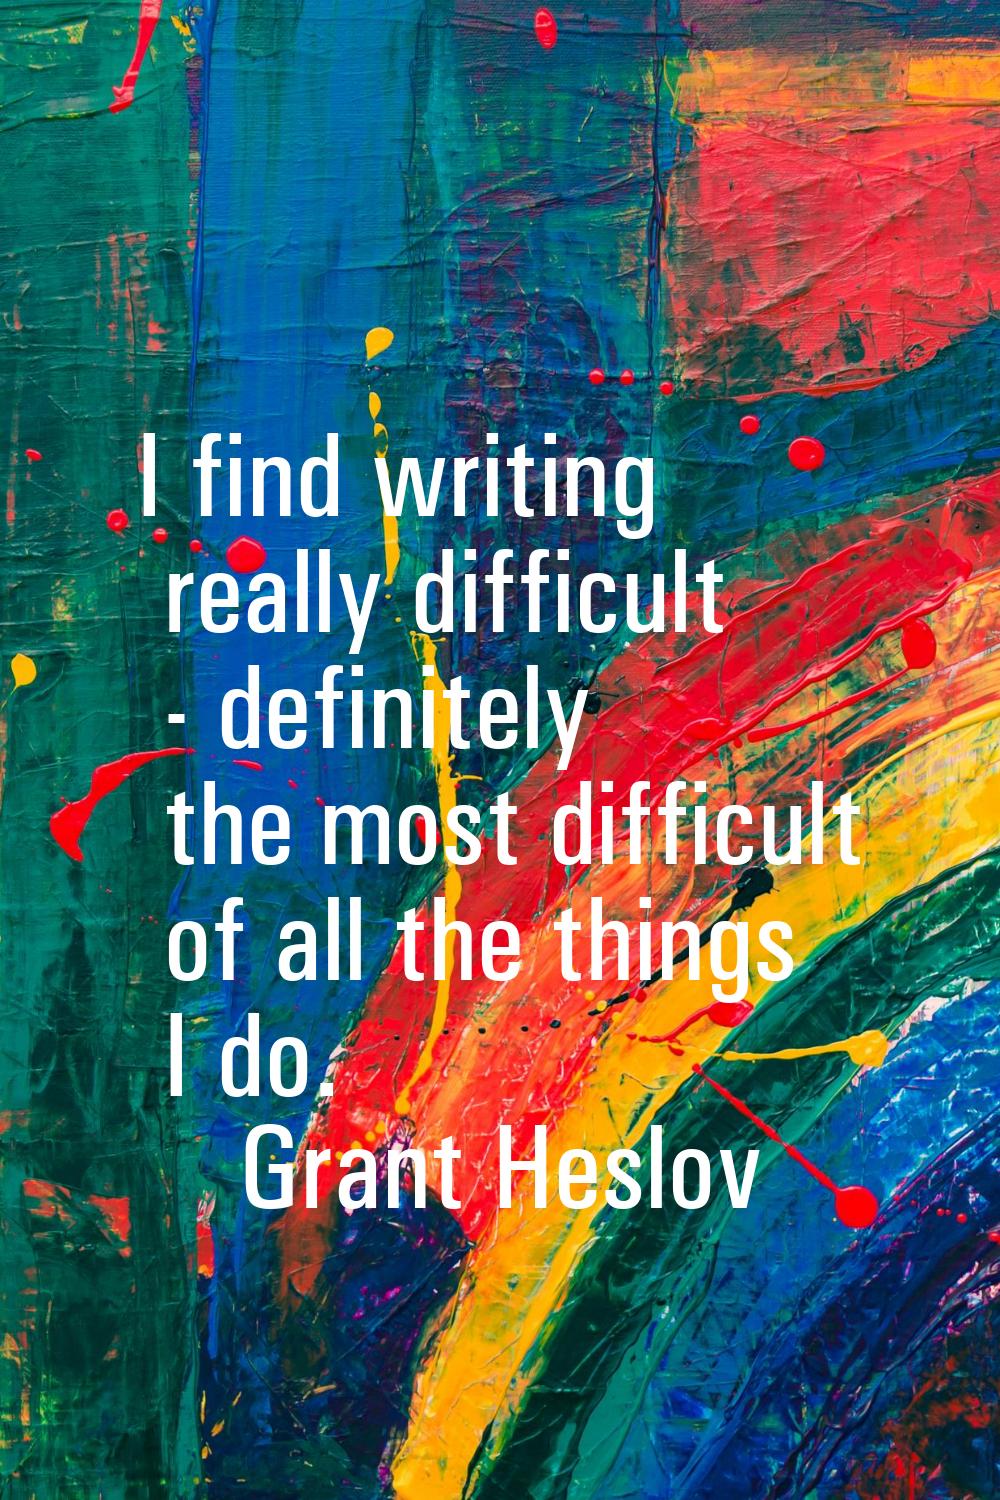 I find writing really difficult - definitely the most difficult of all the things I do.